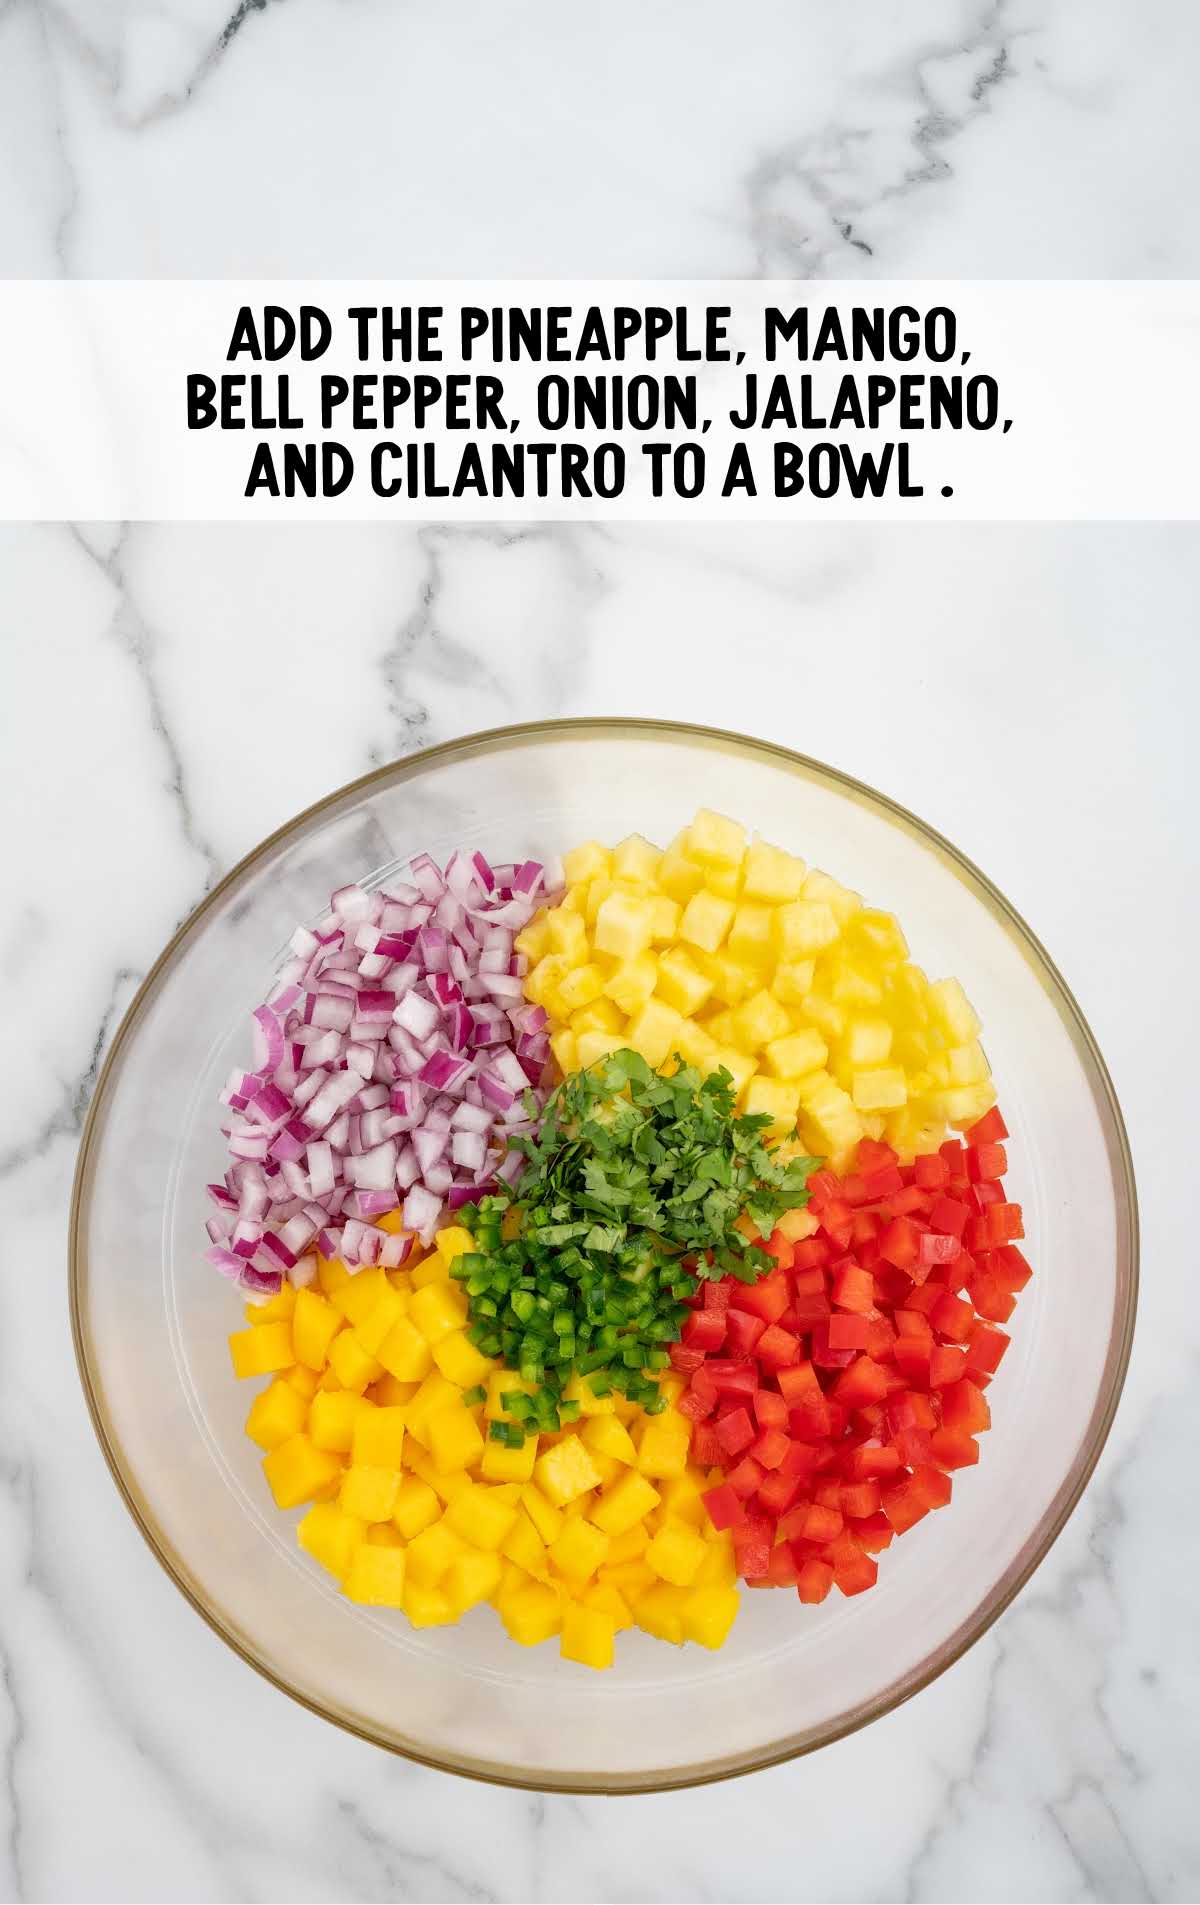 pineapple, mango, bell peppers, onion, jalapeno, and cilantro added to a bowl